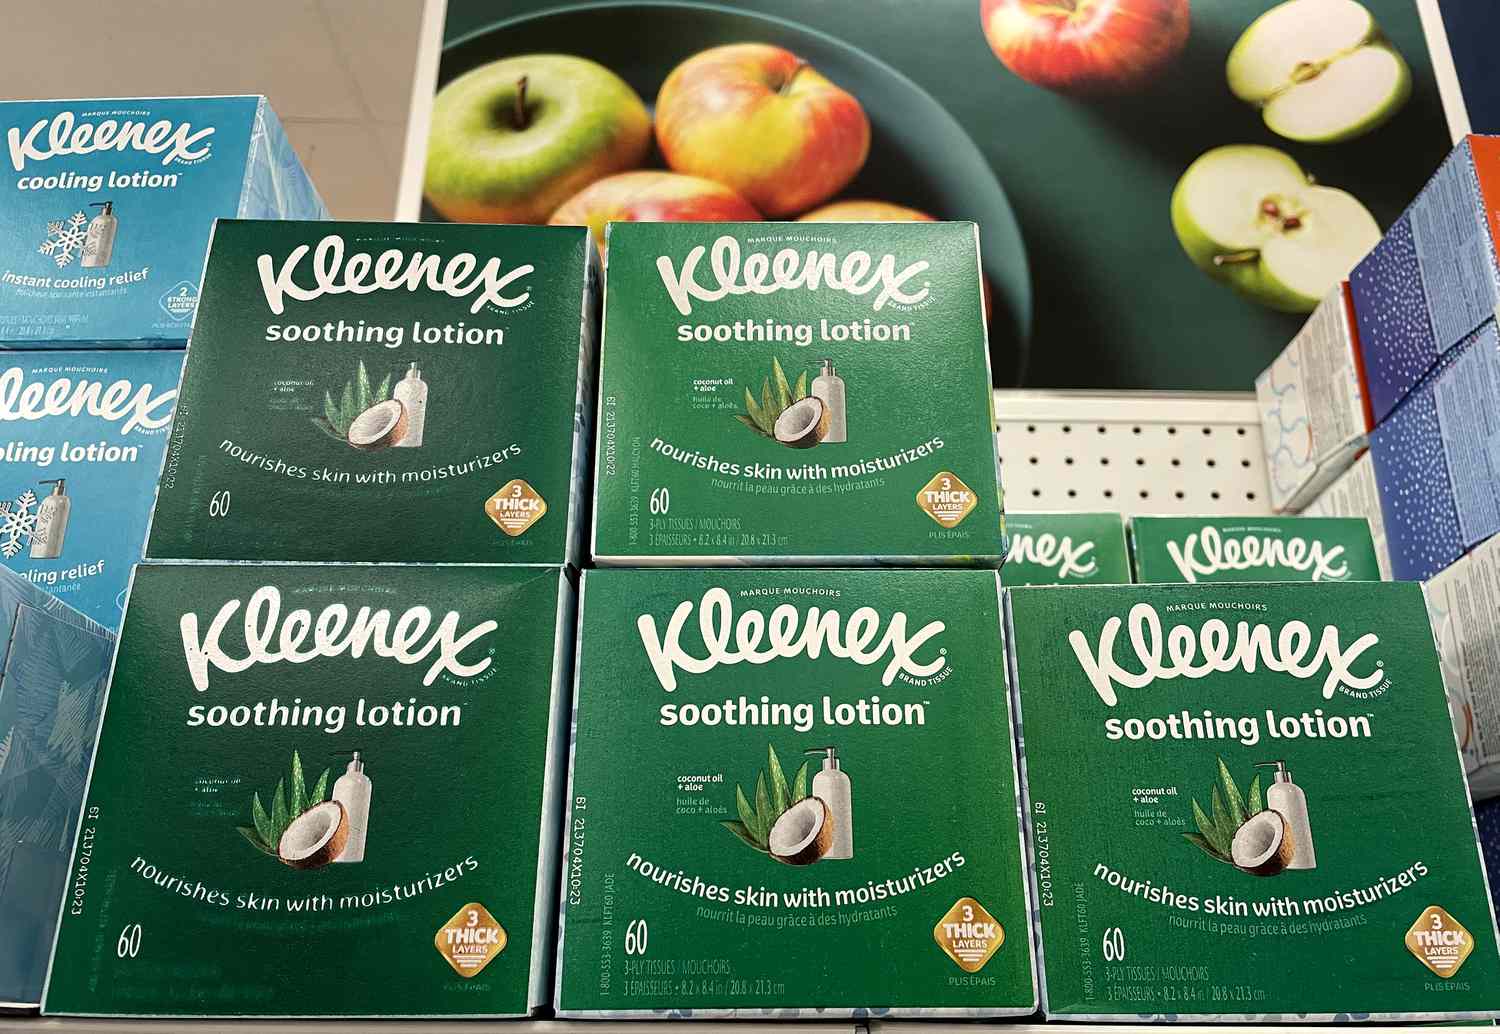 Kleenex Maker Kimberly-Clark Restructures Operations To Become ‘More Agile and Focused’ [Video]